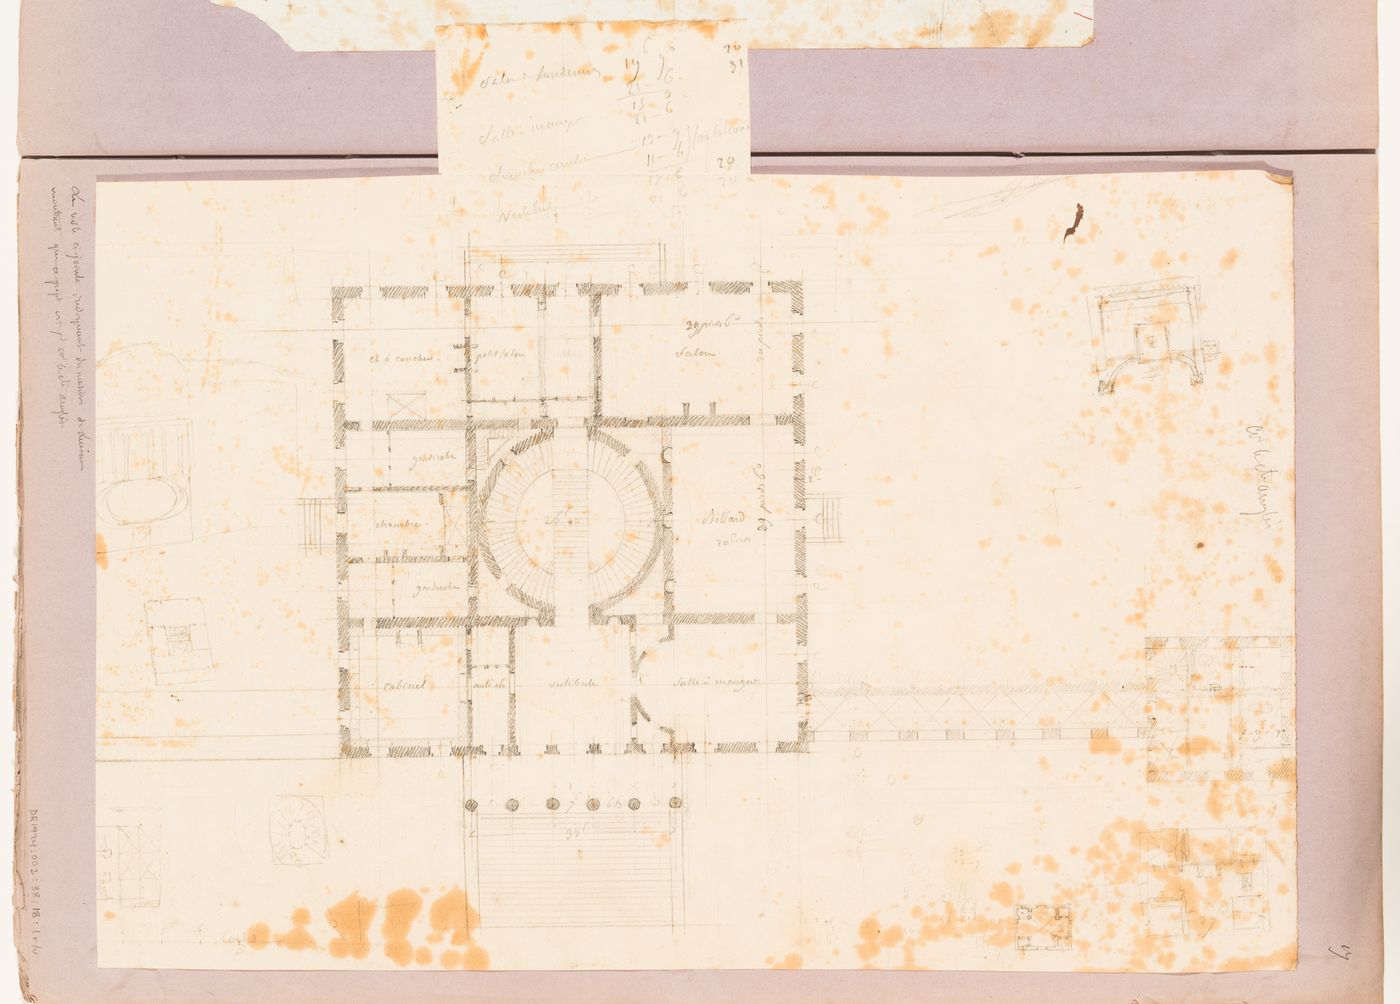 Ground floor plan and sketches for a country house for comte Anglès